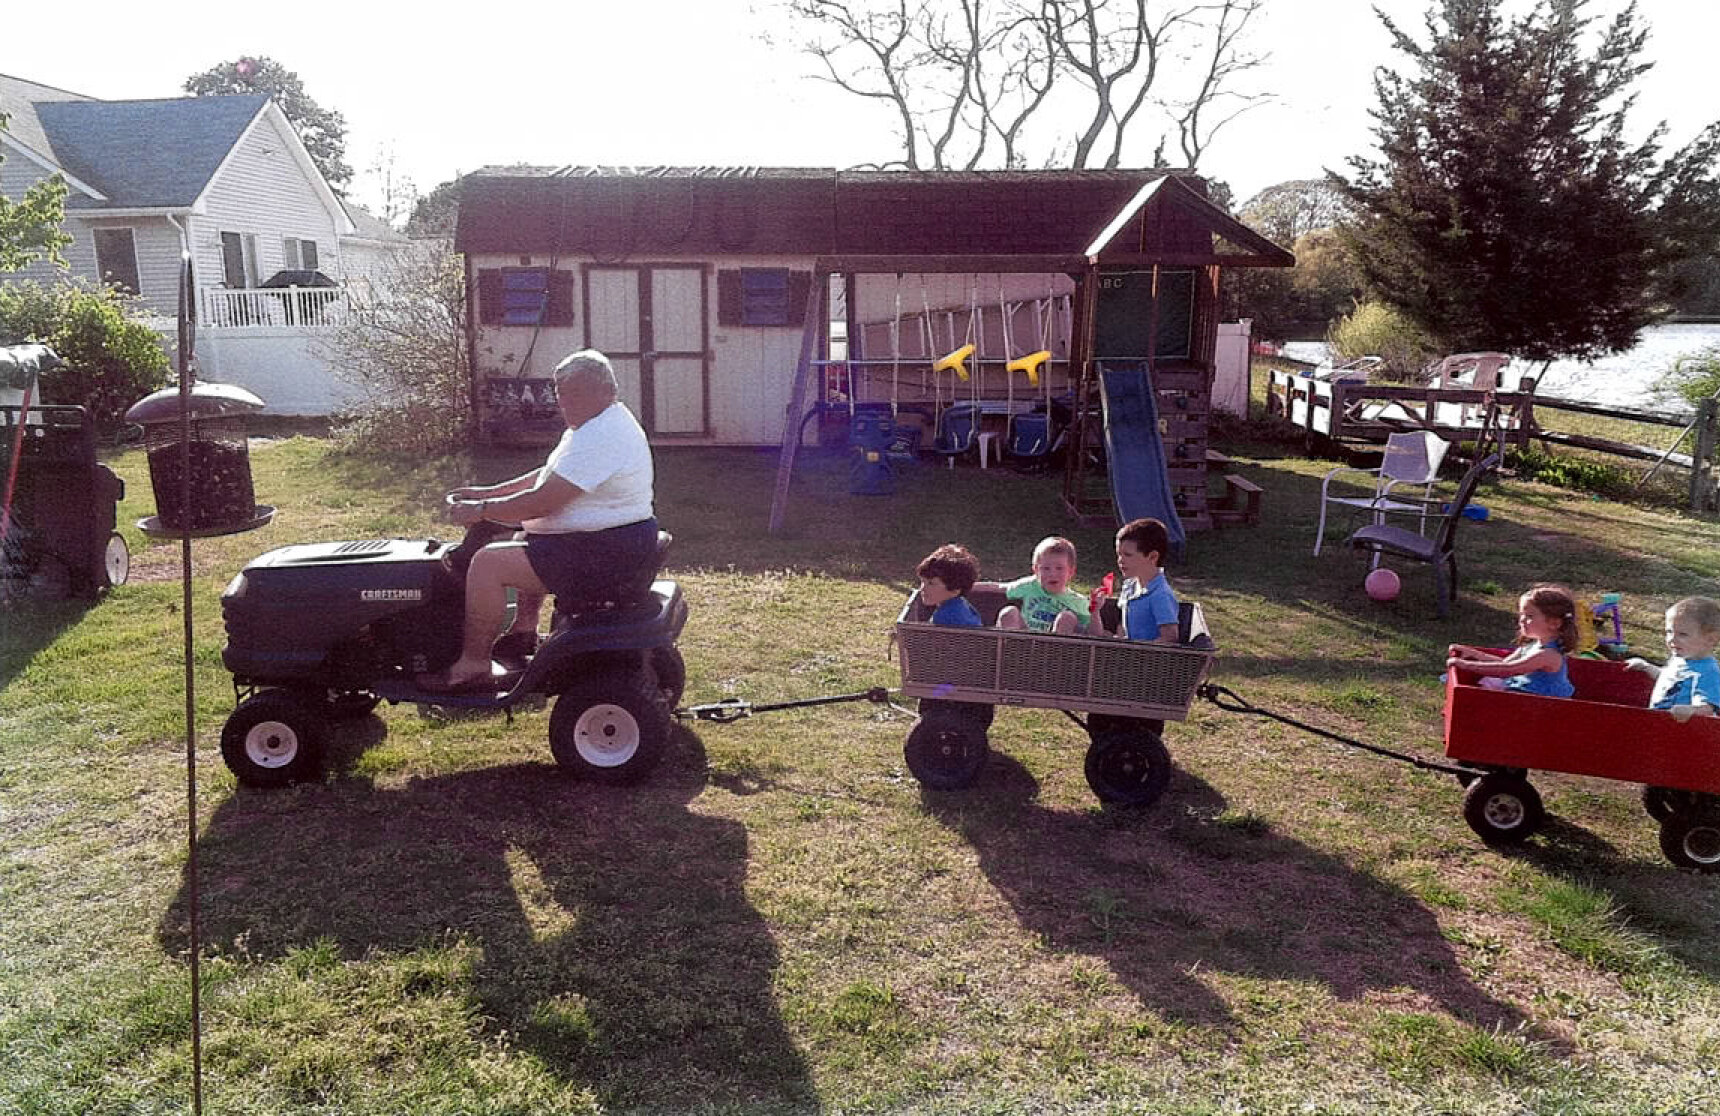 Lou Taylor pulling his grandchildren in wagons.